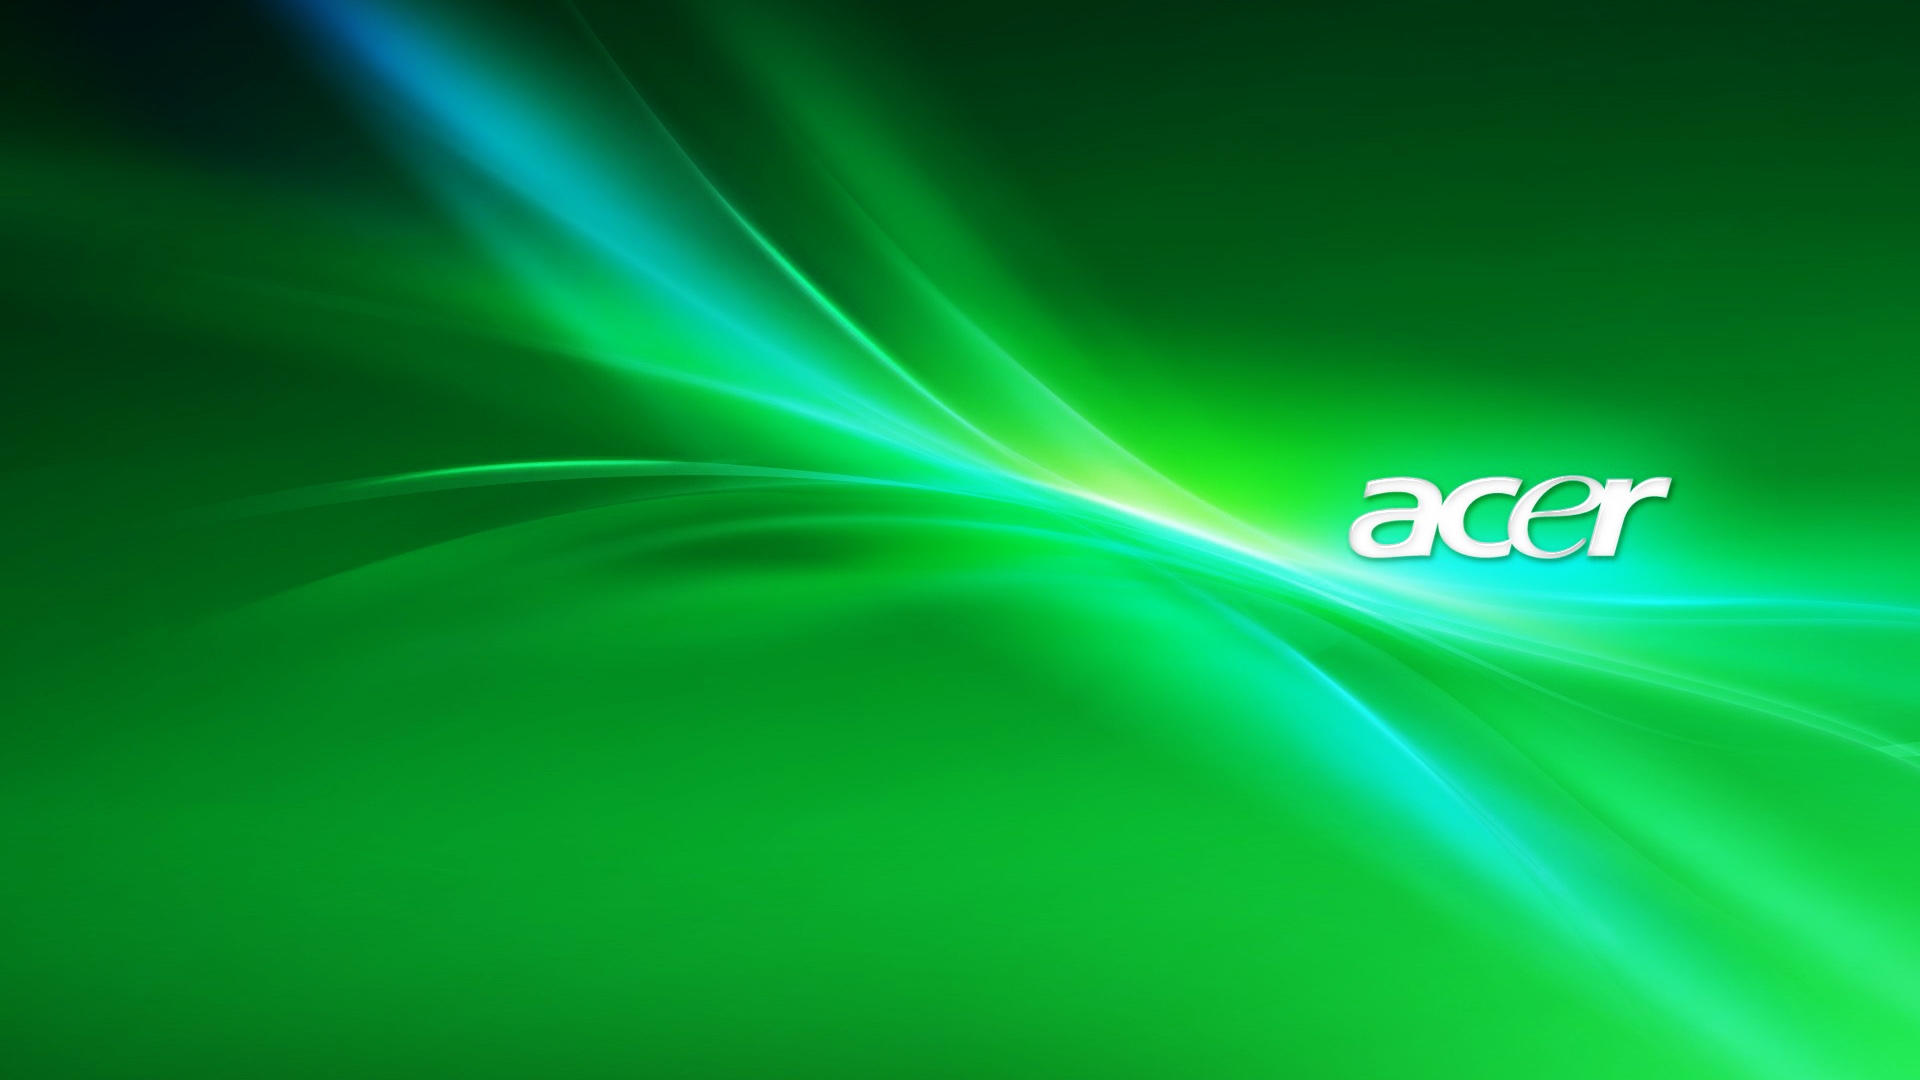 All Best Picos Acer Laptop Wallpaper 25 Acer Laptop Wallpaper 9 Acer Laptop